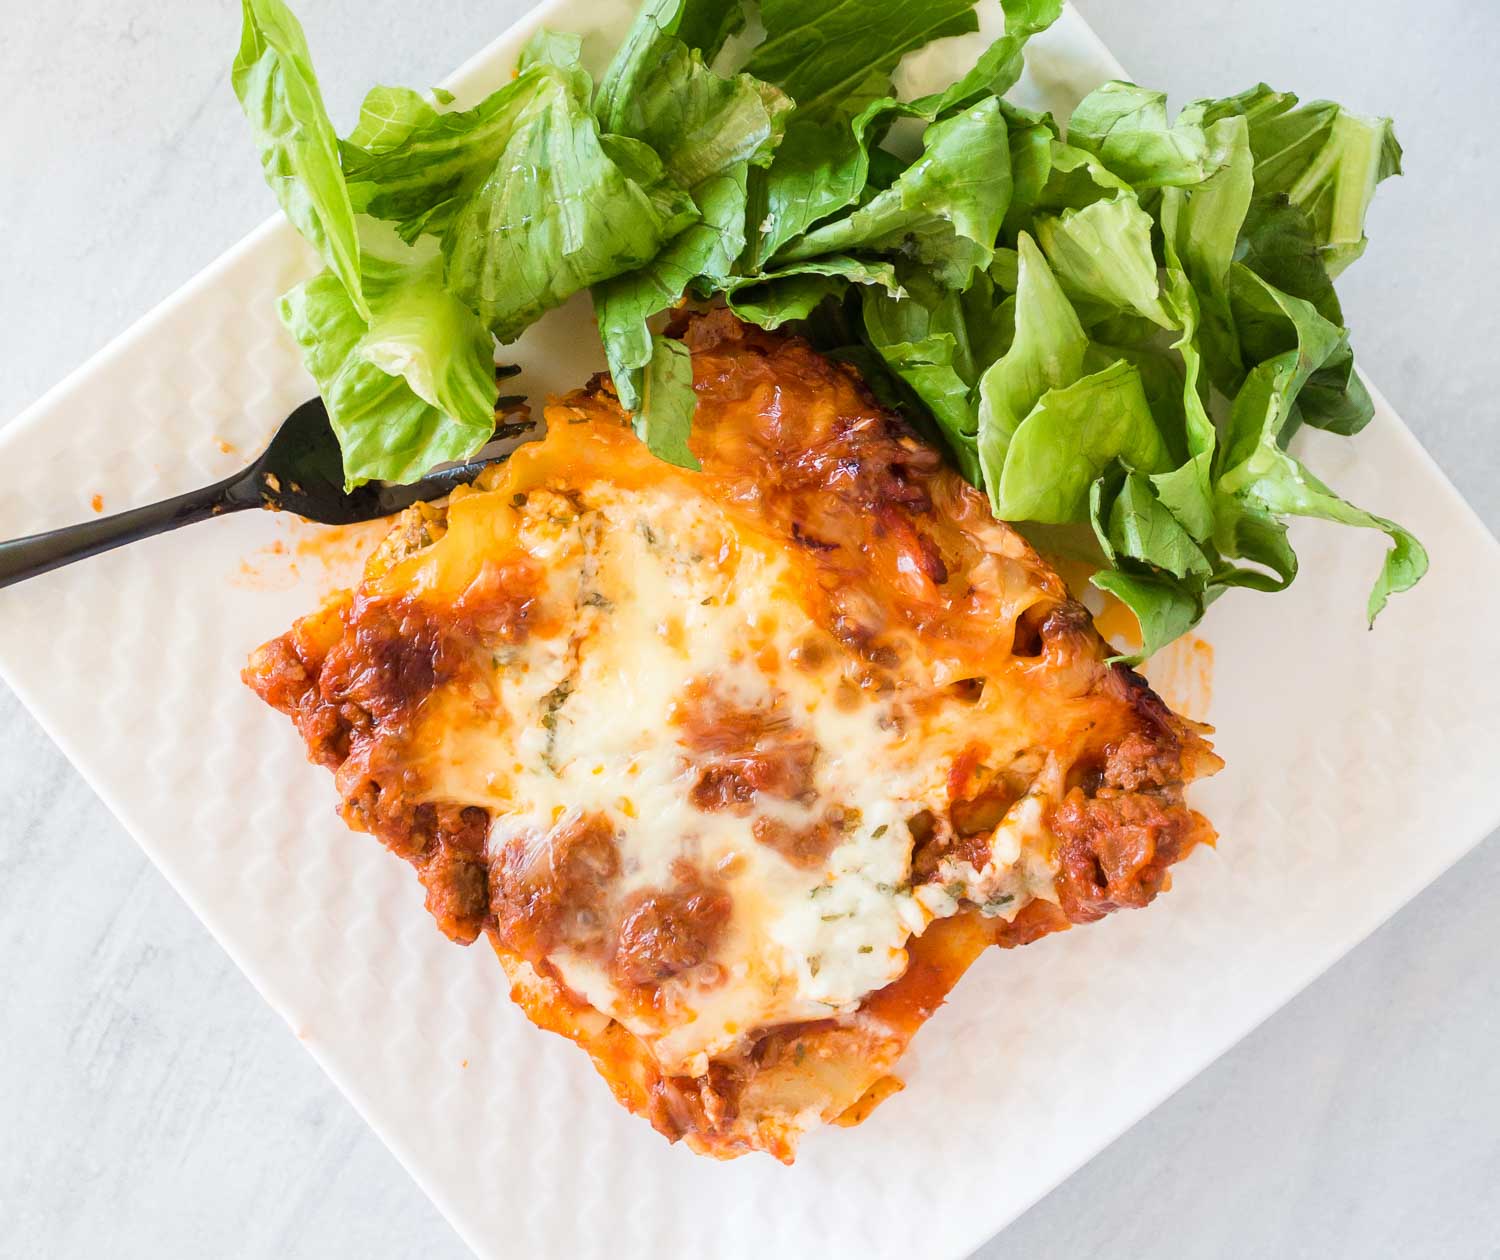 A white plate of a lasagna serving with lettuce on the side and a black fork.